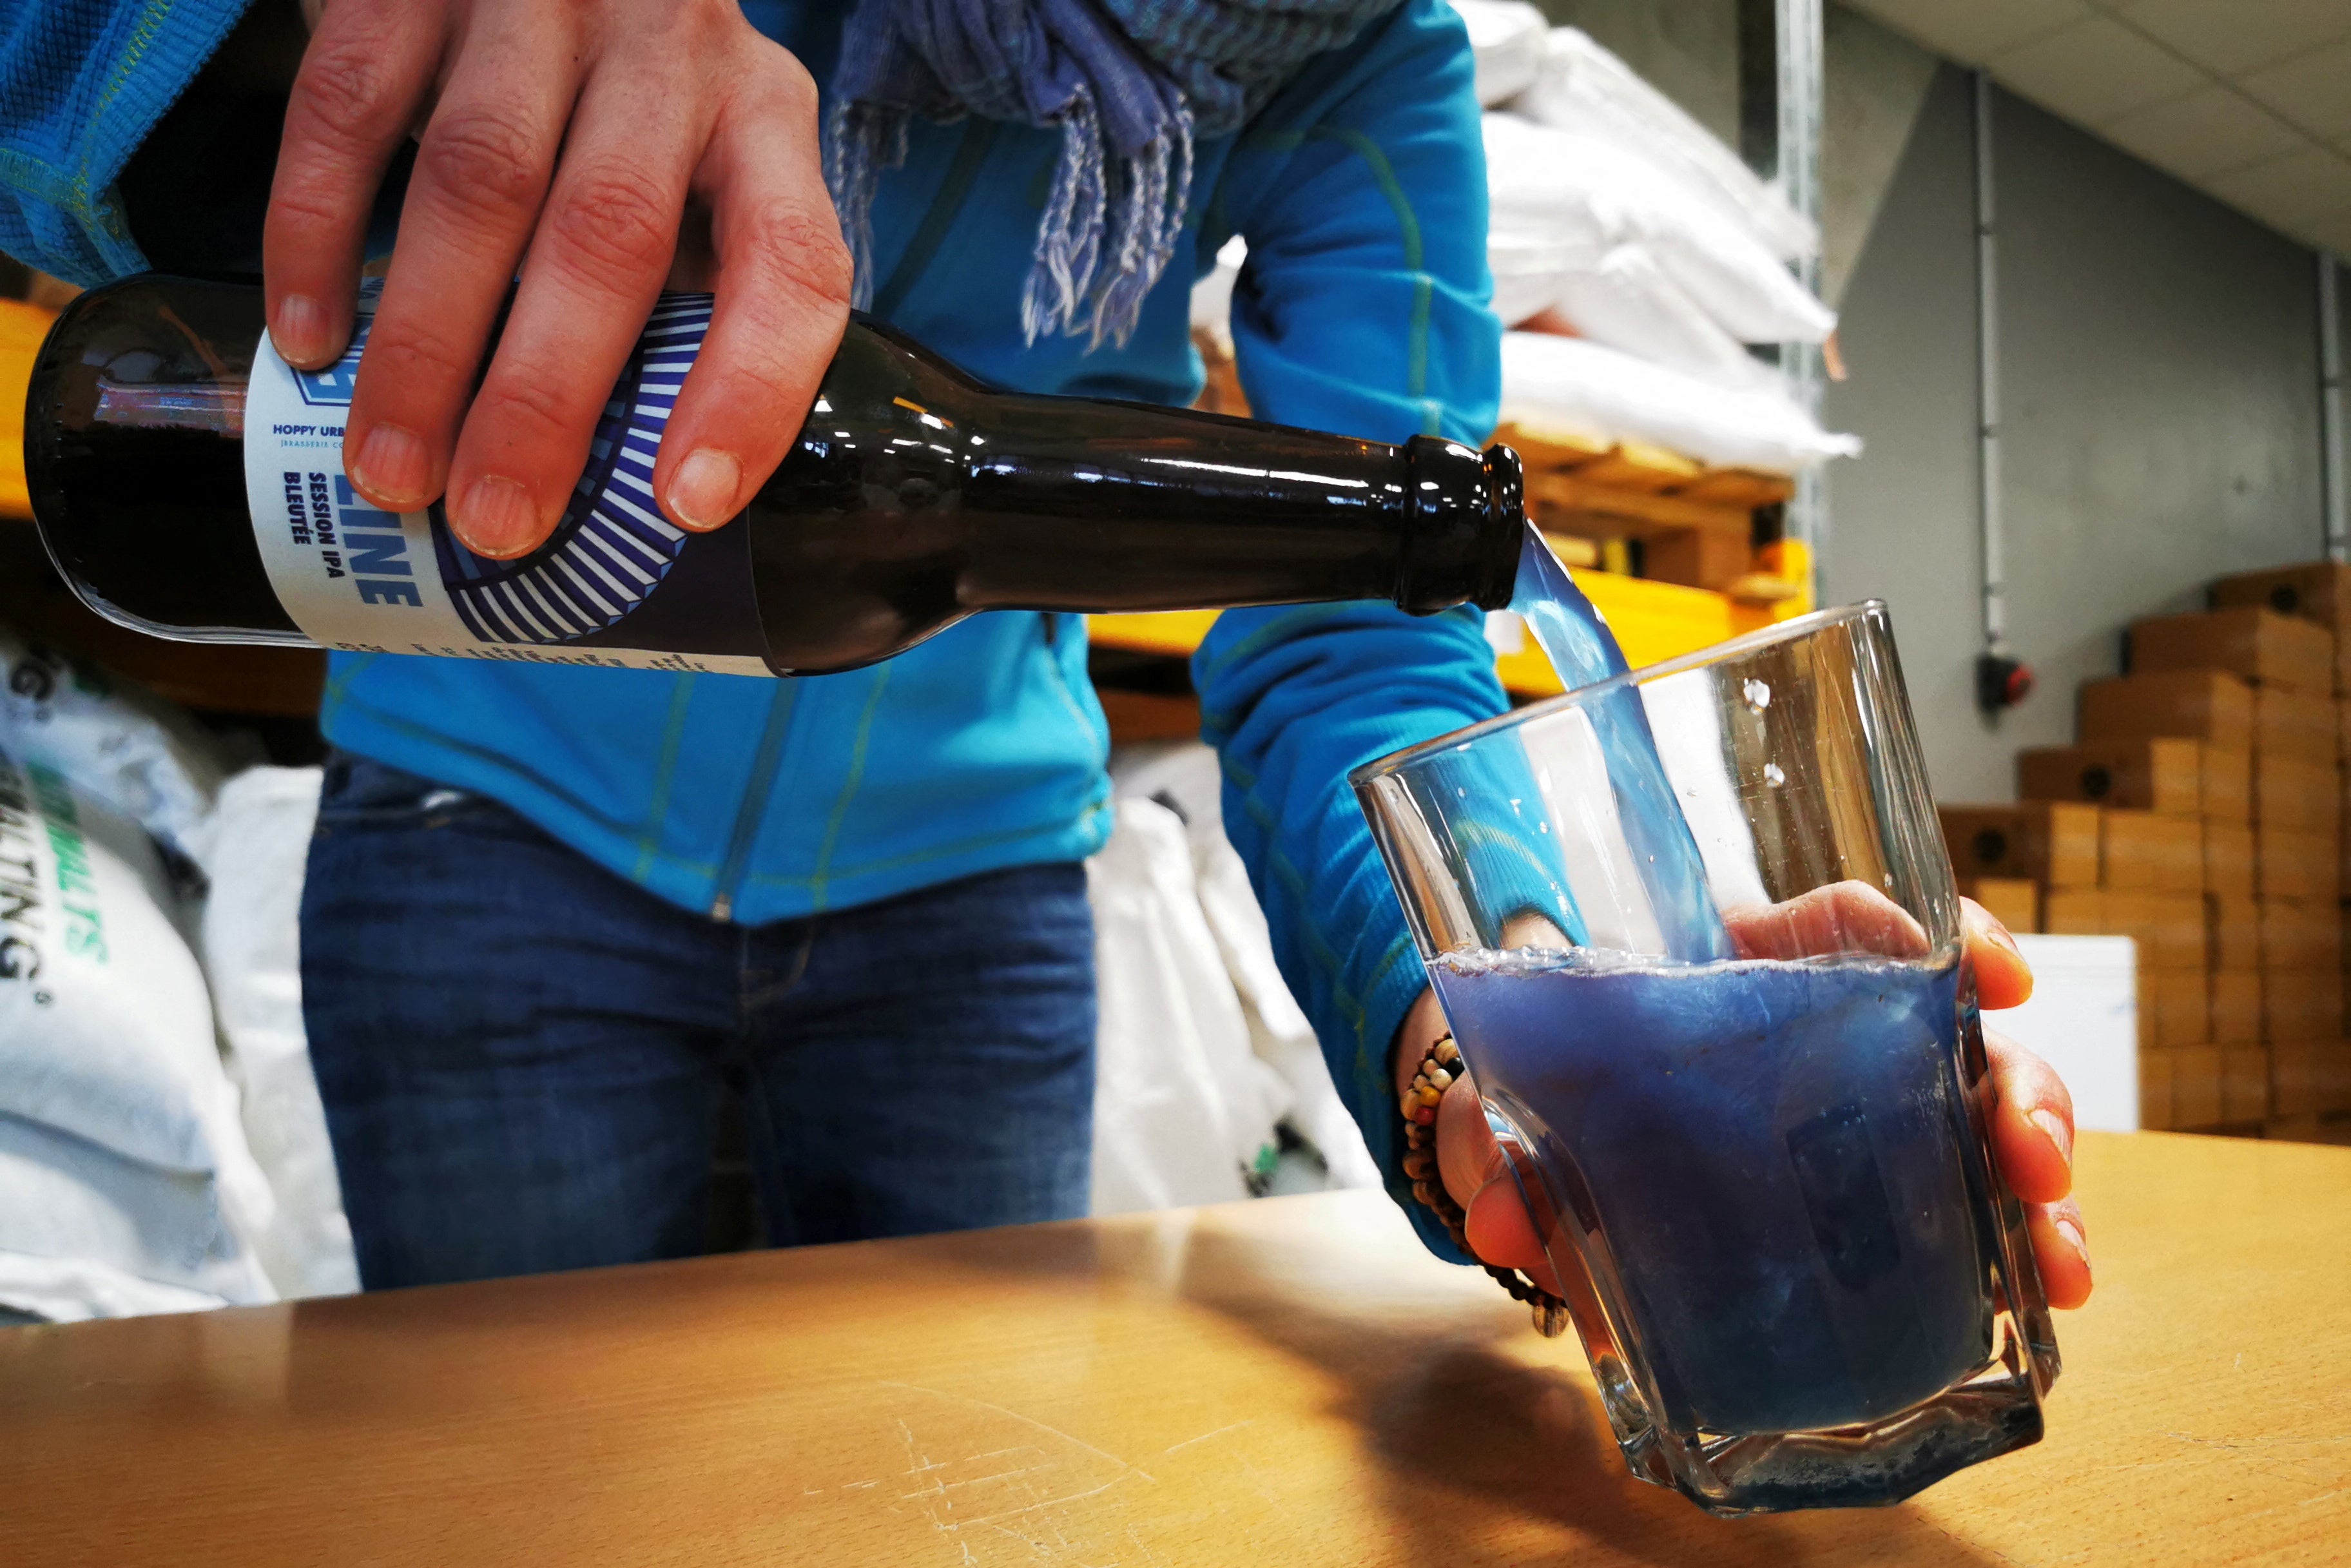 A Hoppy Urban Brew (HUB) worker pours a bottle of the Line blue beer, which is made with spirulina algae, in n Roubaix near Lille, France, 31 January 2022